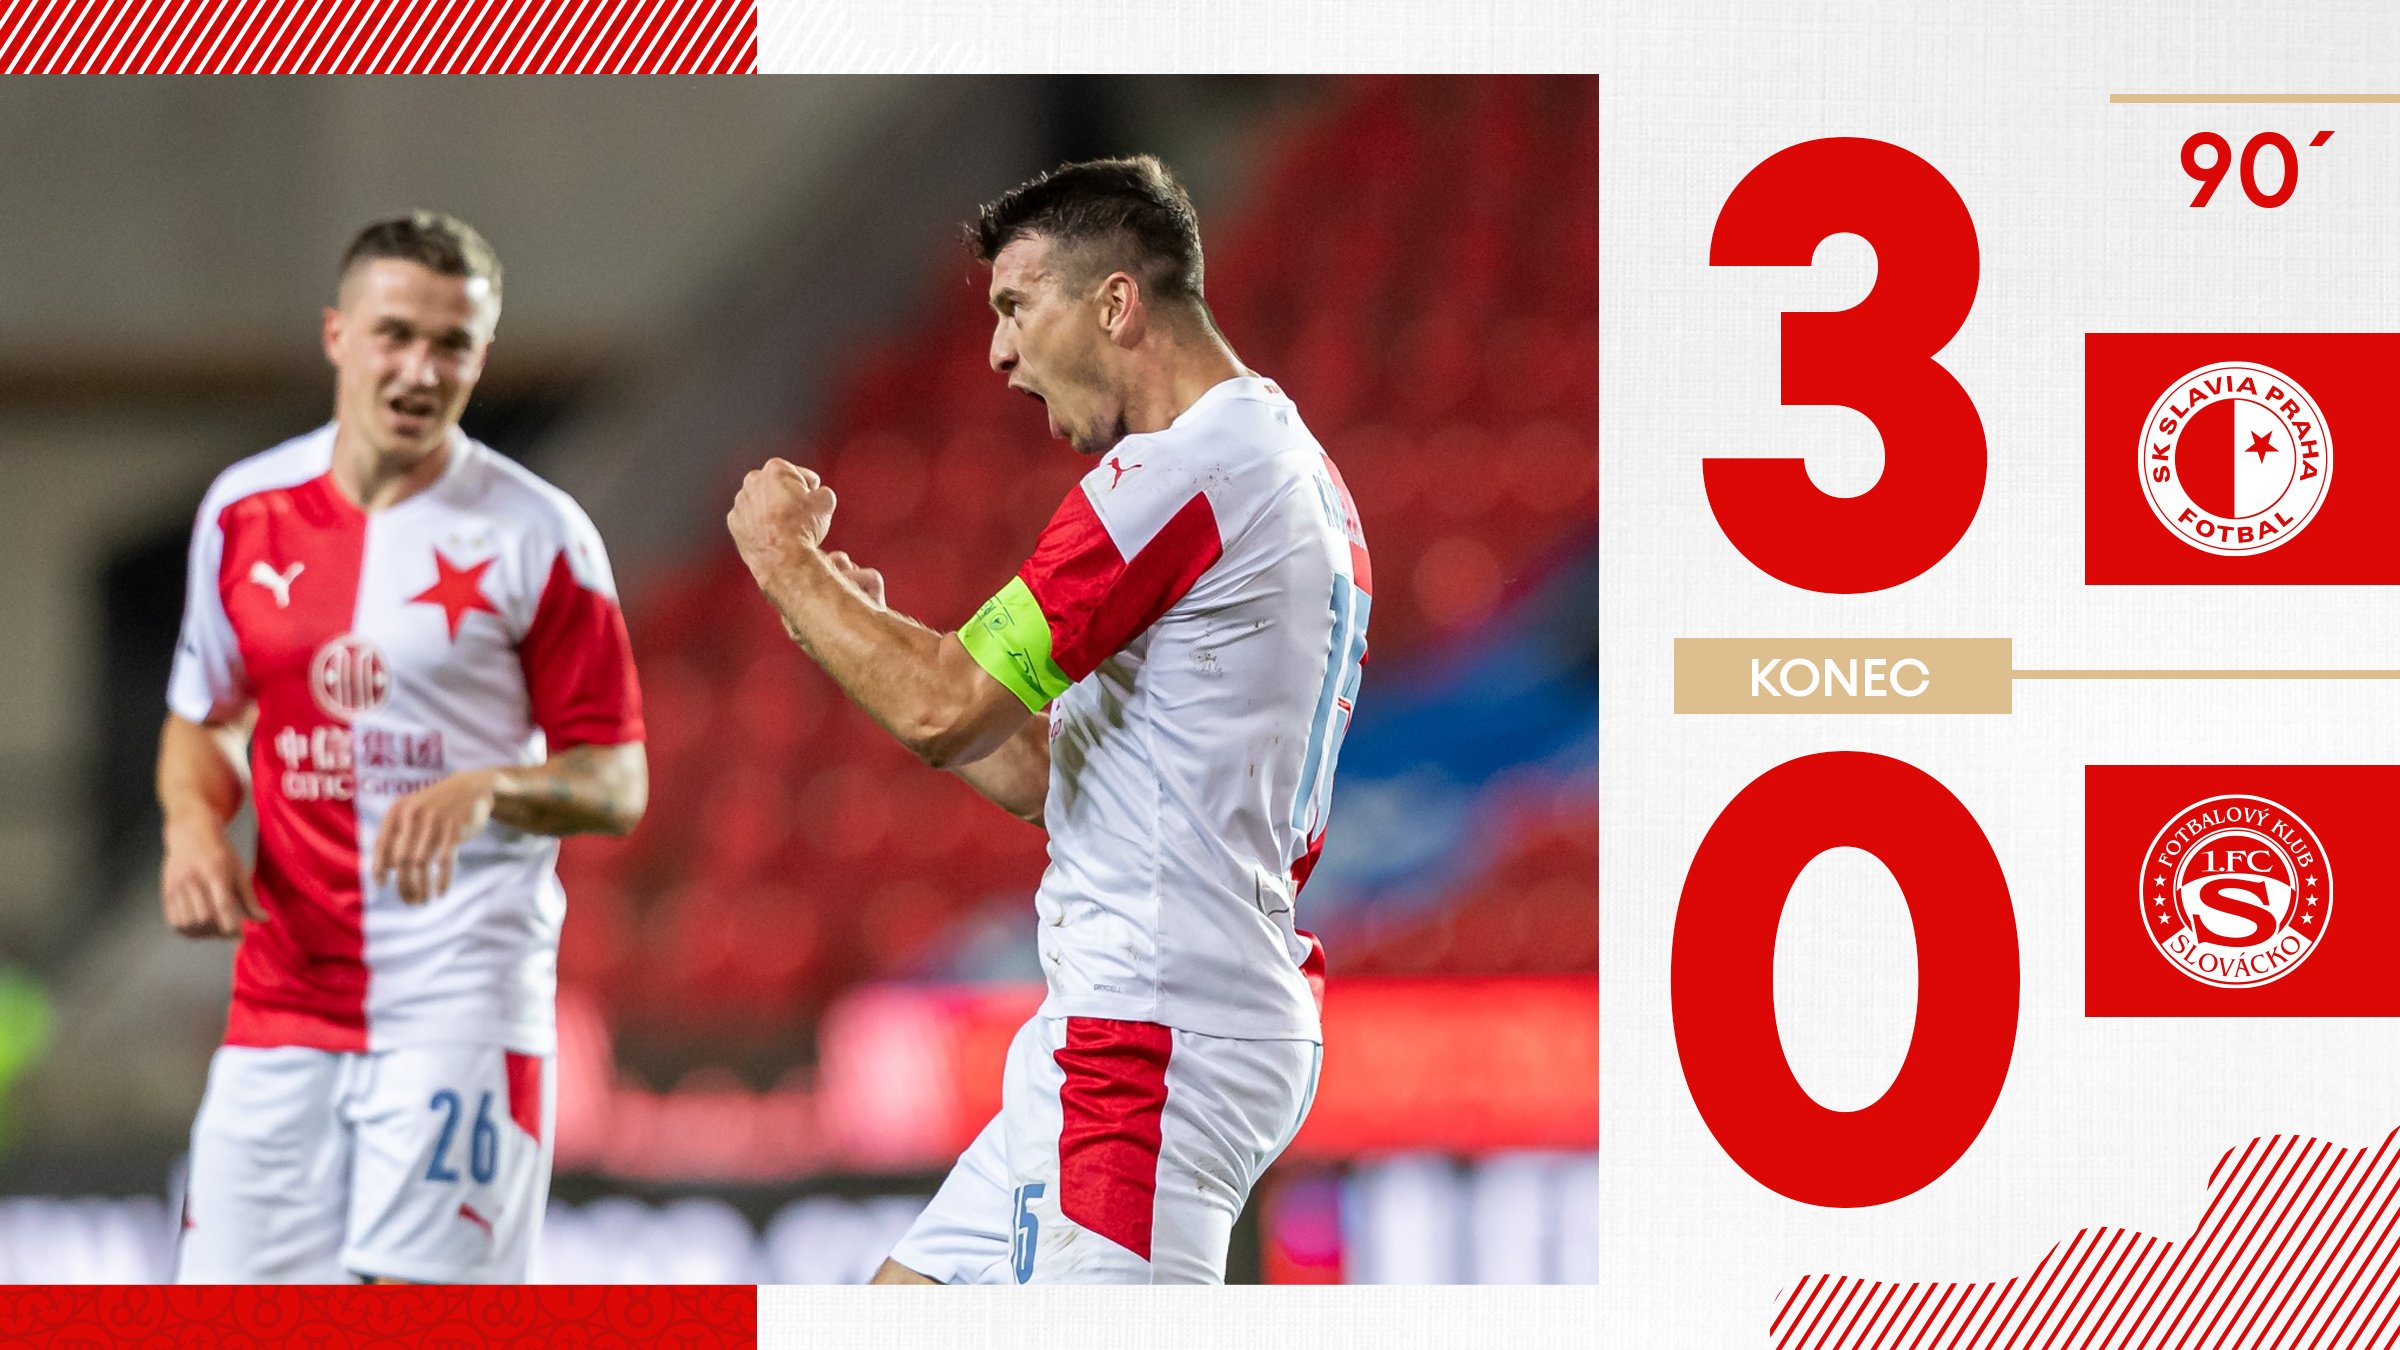 SK Slavia Prague EN on X: FULL TIME  Slavia 3⃣-0⃣ Slovácko All three  points stay in Prague! ⚽⚽ Two goals from the captain and ⚽ one goal by  Lukáš Provod secure